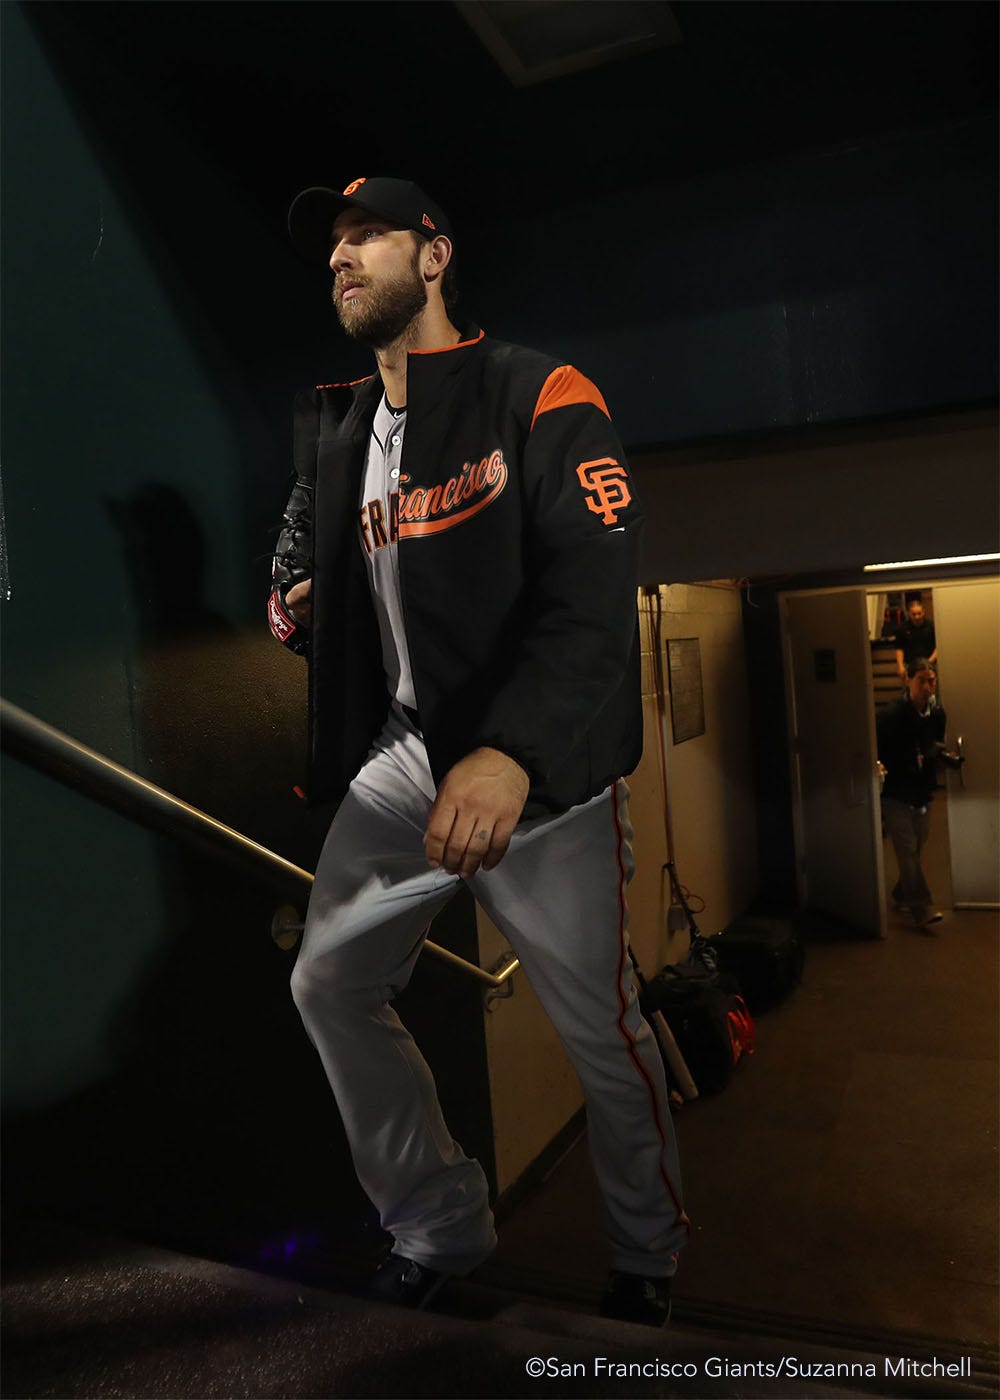 Madison Bumgarner enters the dugout to begin warming up for the game.